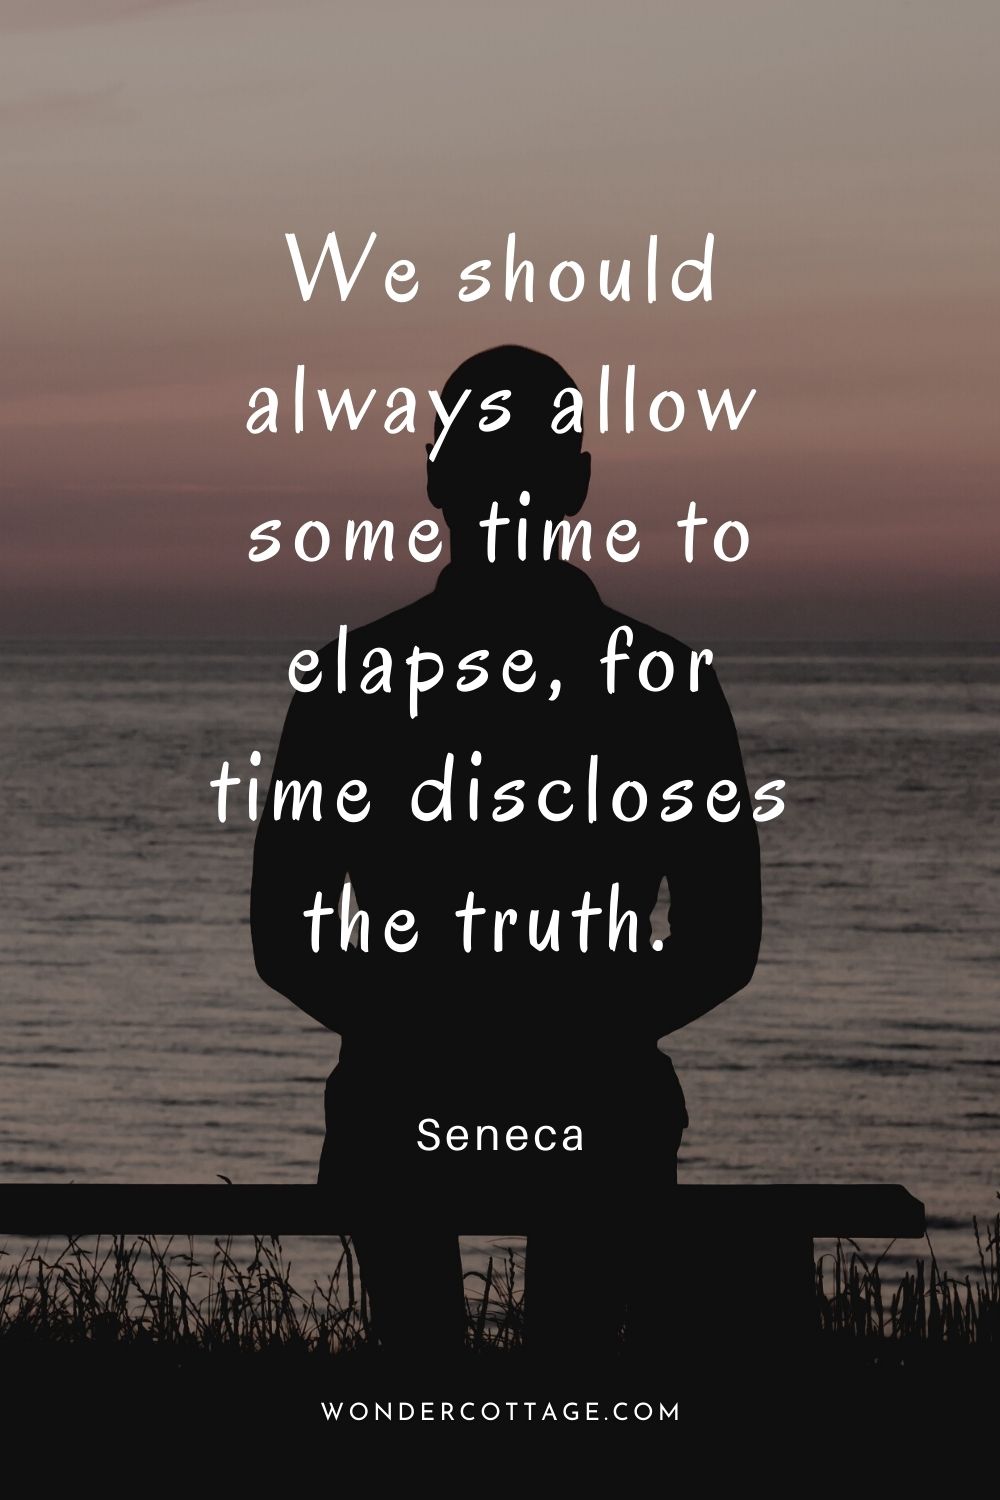 We should always allow some time to elapse, for time discloses the truth.  Seneca